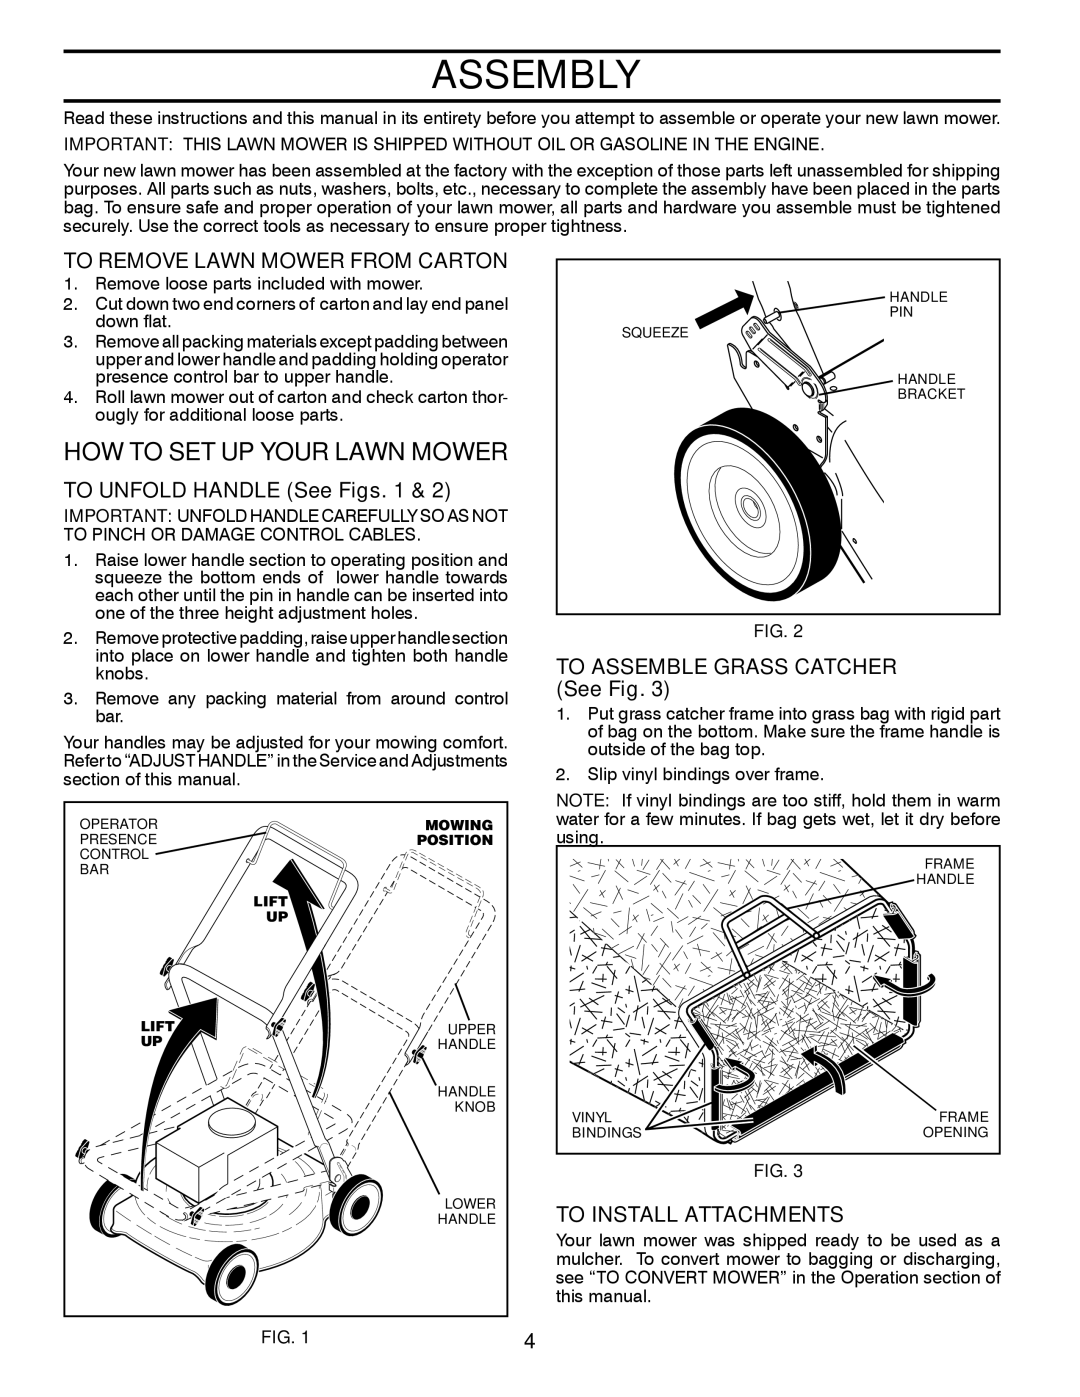 Husqvarna 7021RB Assembly, How To Set Up Your Lawn Mower, To Remove Lawn Mower From Carton, TO UNFOLD HANDLE See Figs 